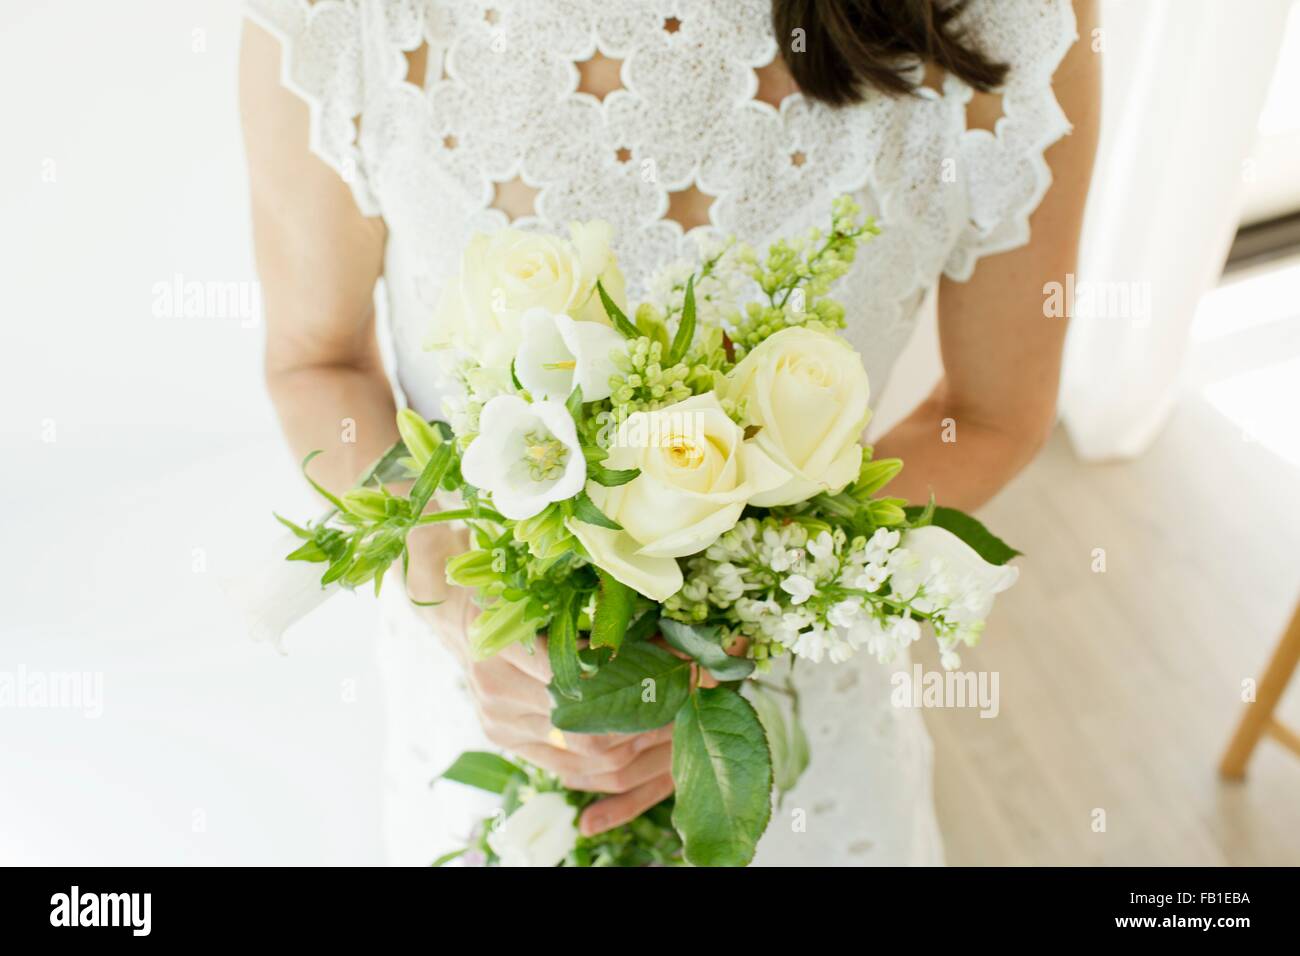 Portrait of young woman wearing broderie anglaise holding flower arrangements Banque D'Images